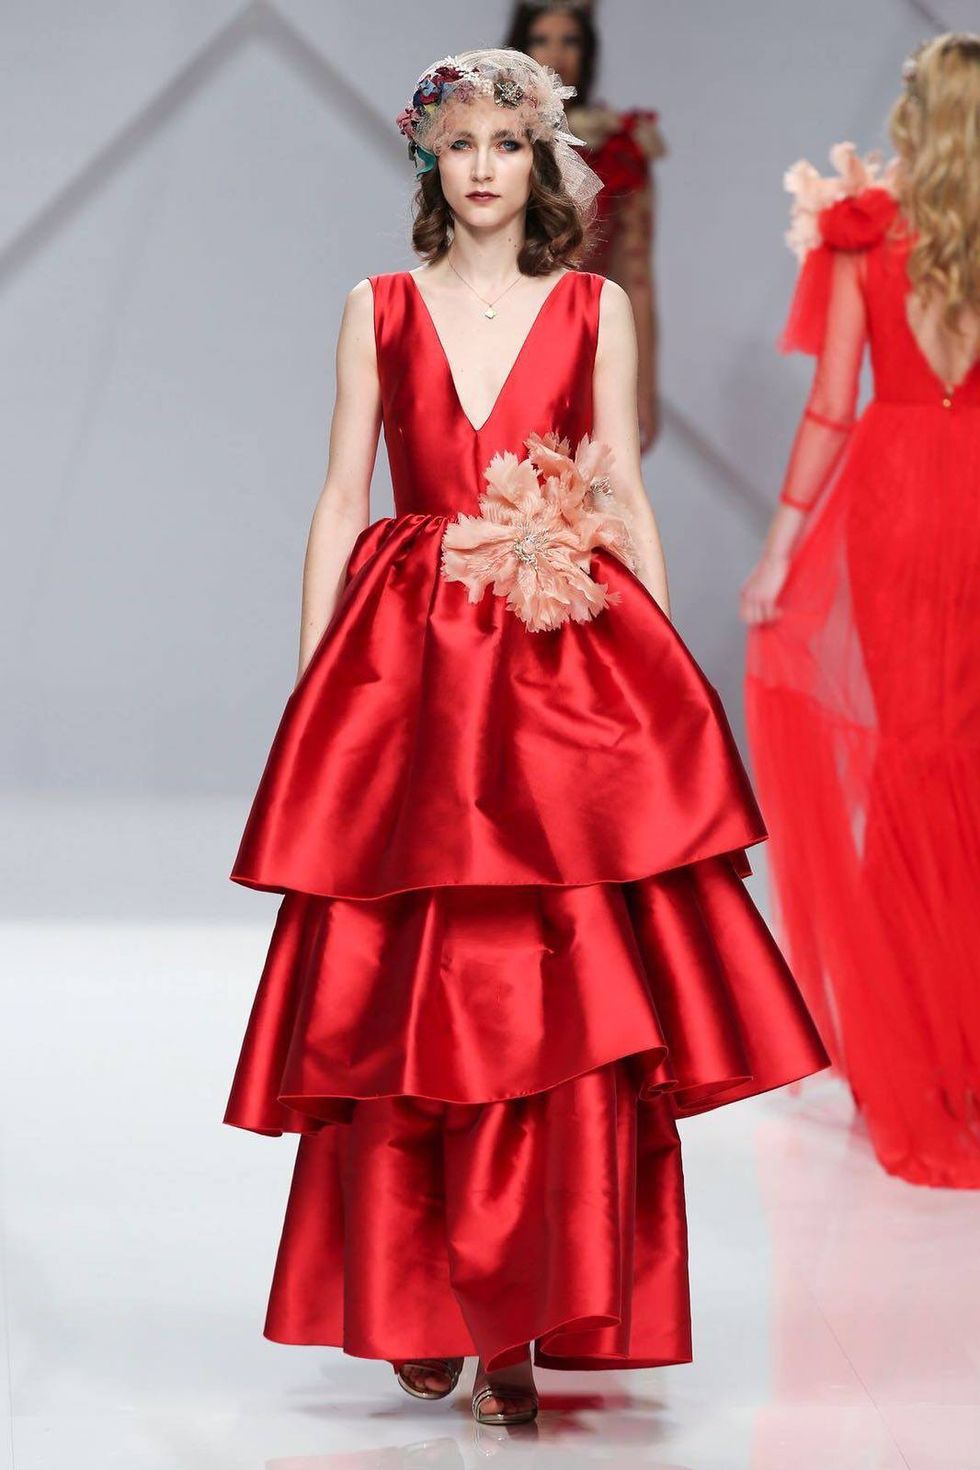 Dress, Shoulder, Textile, Red, One-piece garment, Fashion show, Style, Formal wear, Fashion model, Gown, 